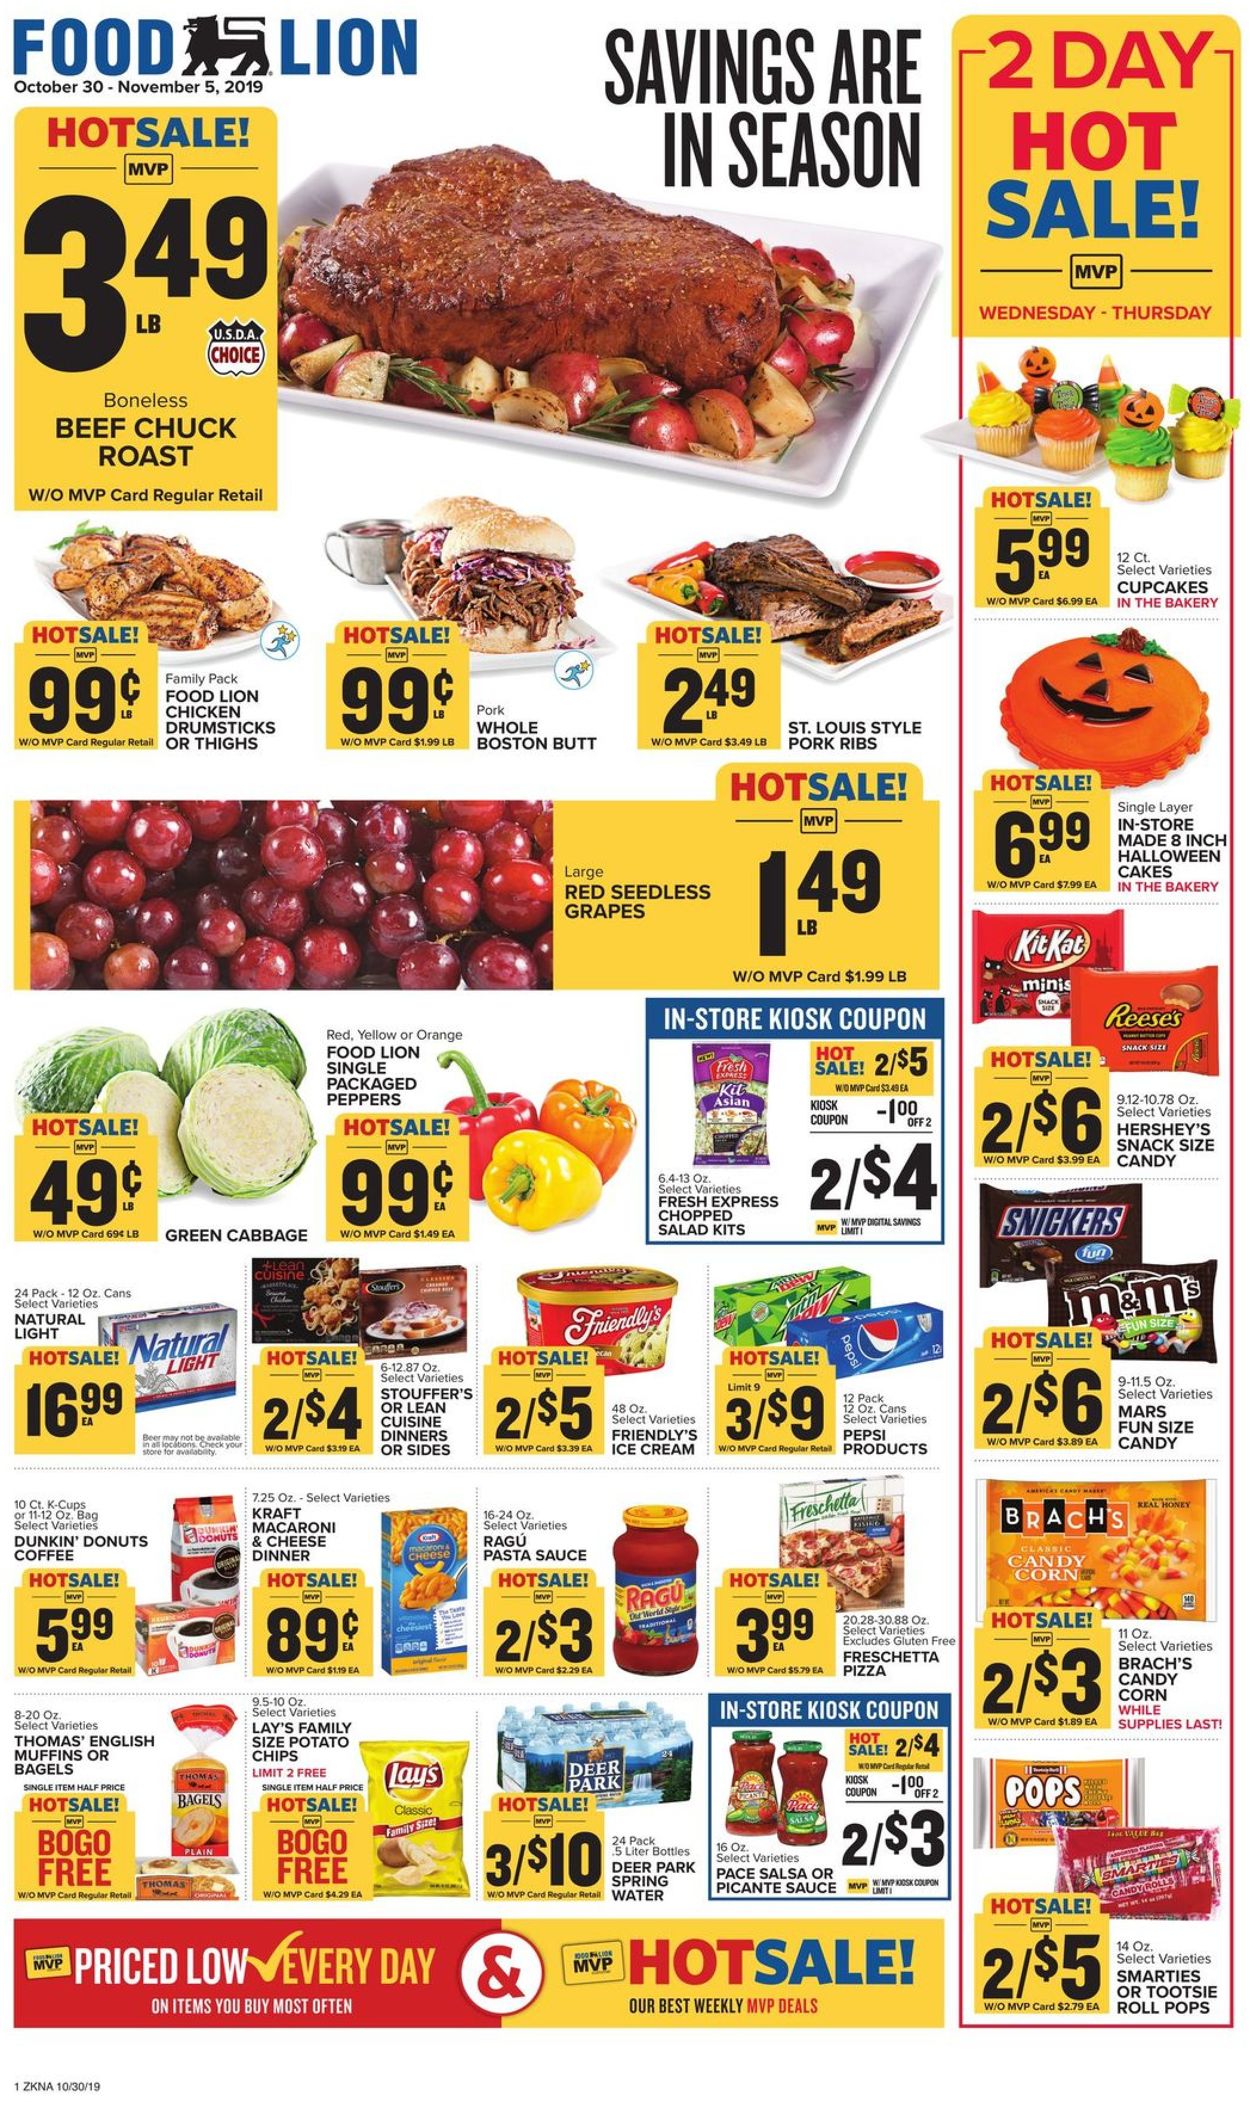 Food Lion Current weekly ad 10/30 - 11/05/2019 - frequent-ads.com